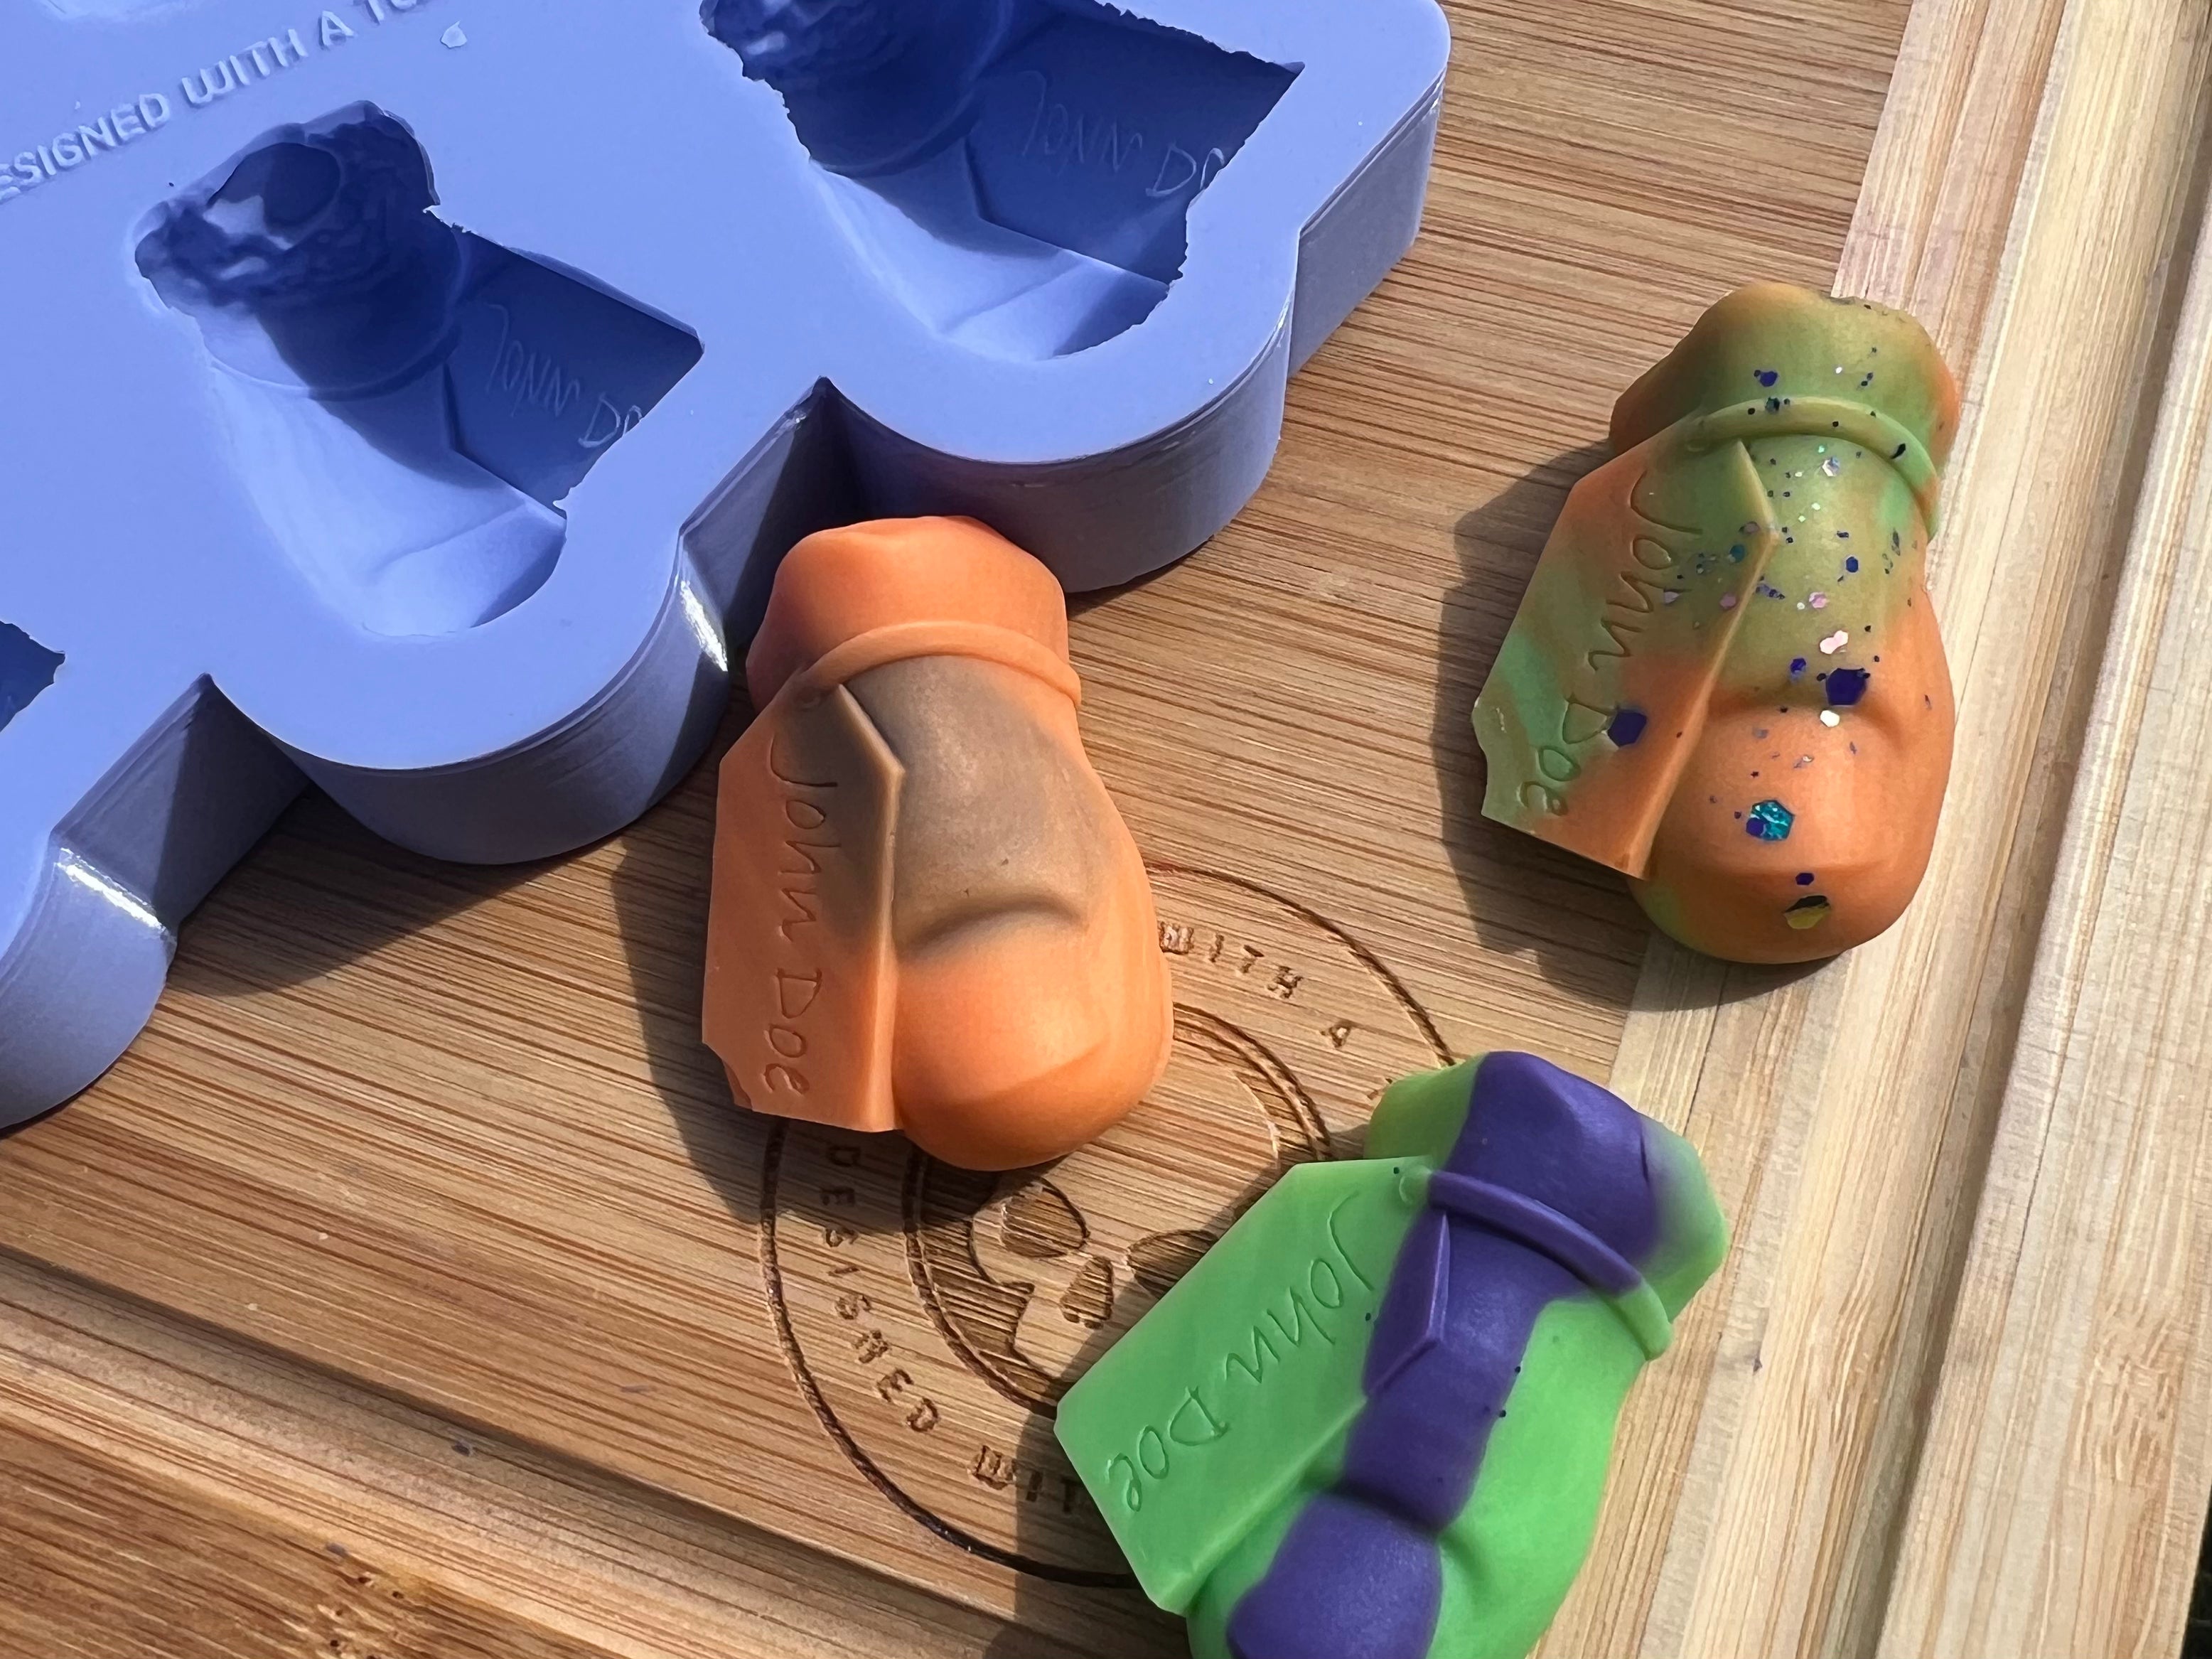 John Doe’s Toe Mini Wax Melt Silicone Mold - Designed with a Twist - Top quality silicone molds made in the UK.